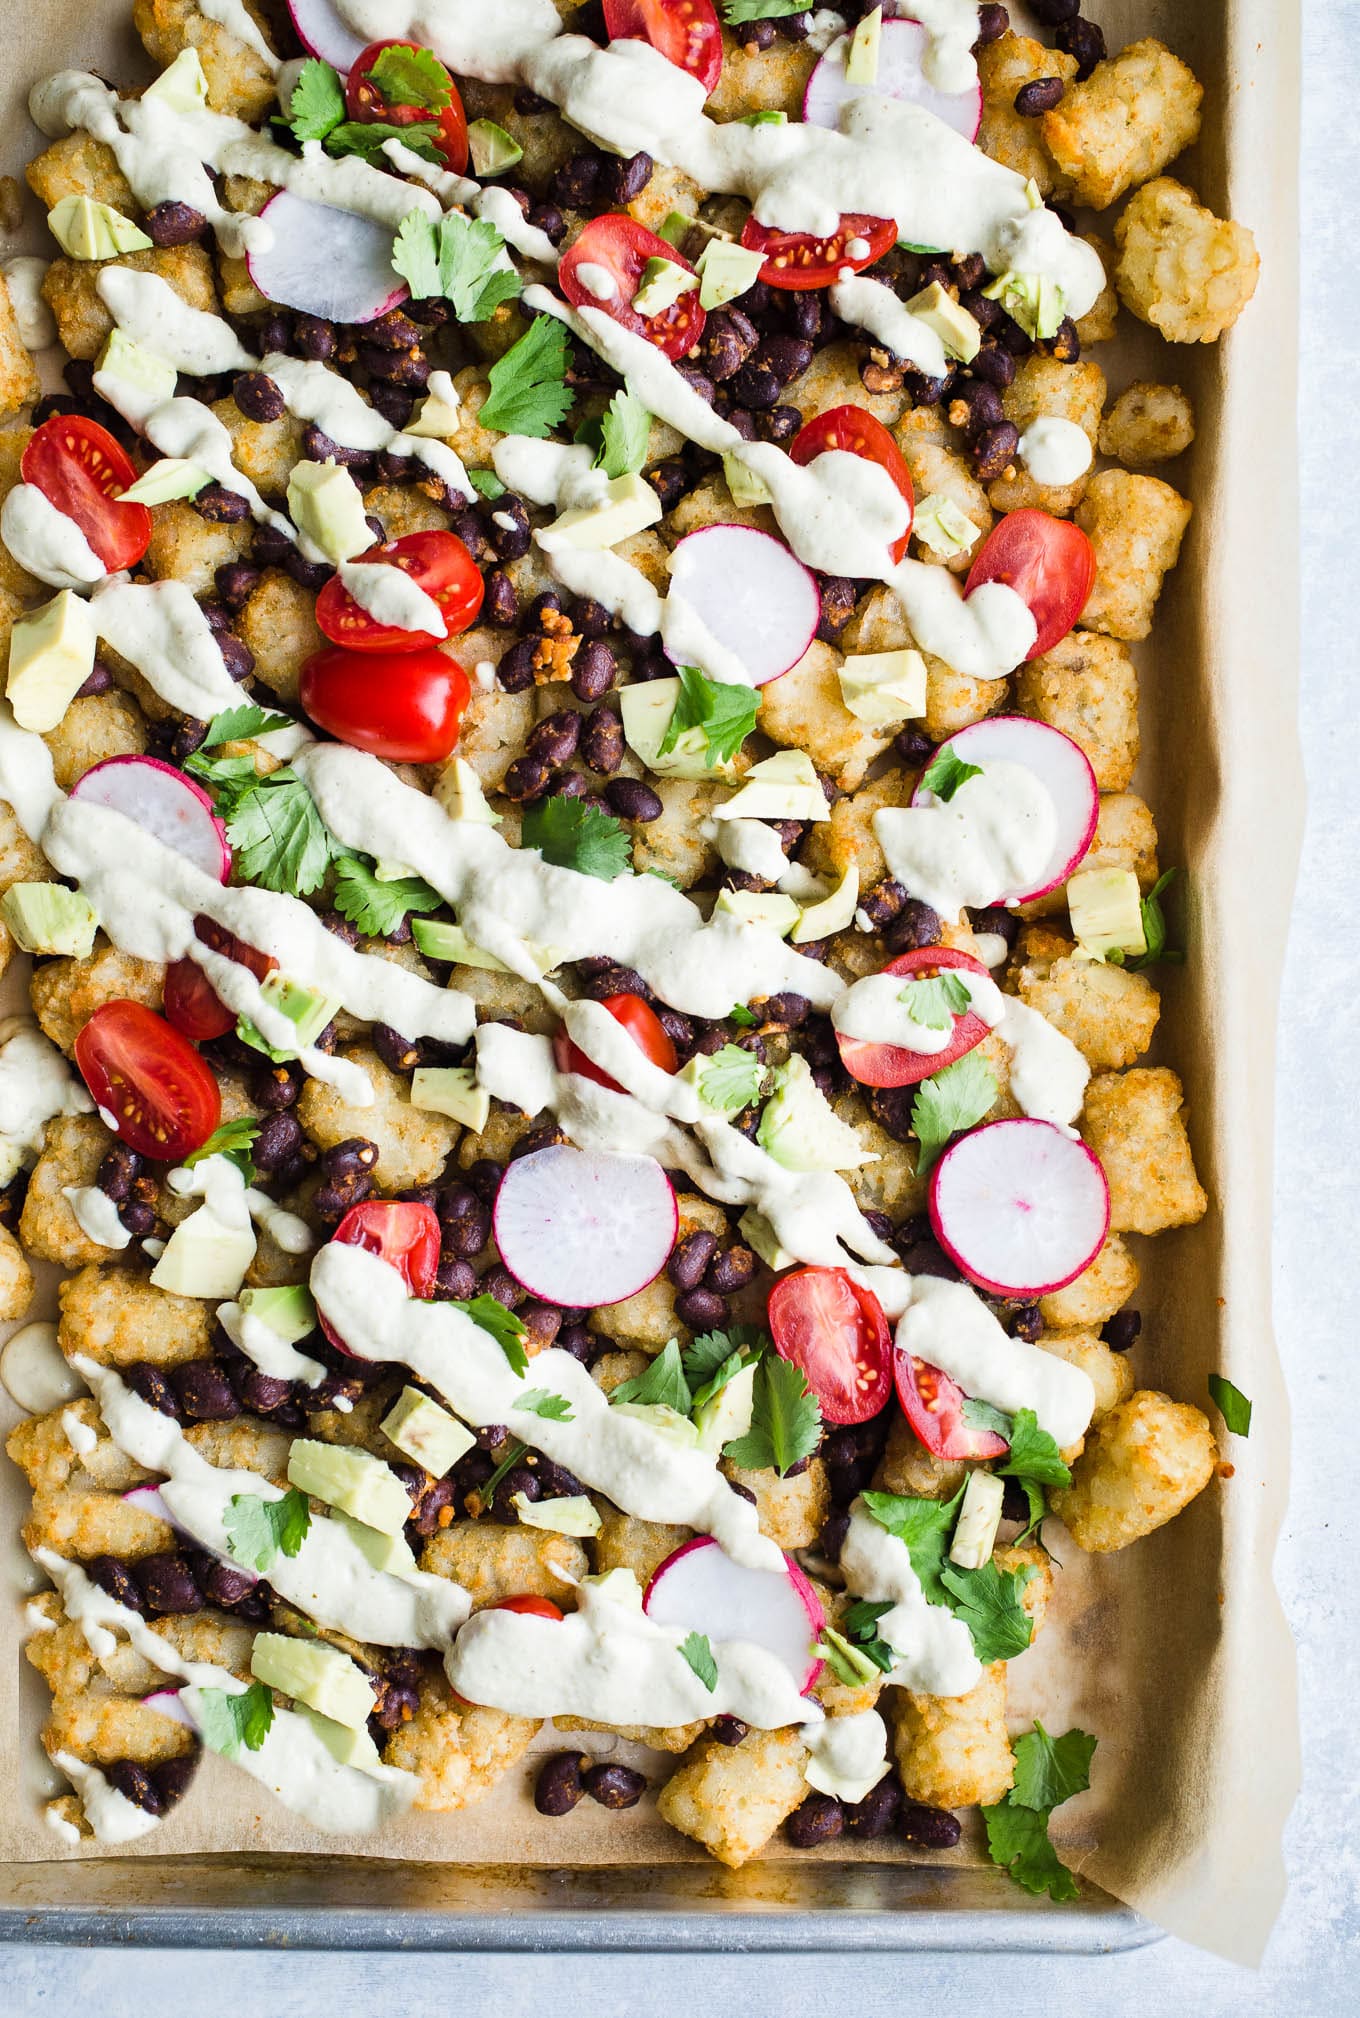 Tater tot nachos loaded with toppings on a baking sheet.